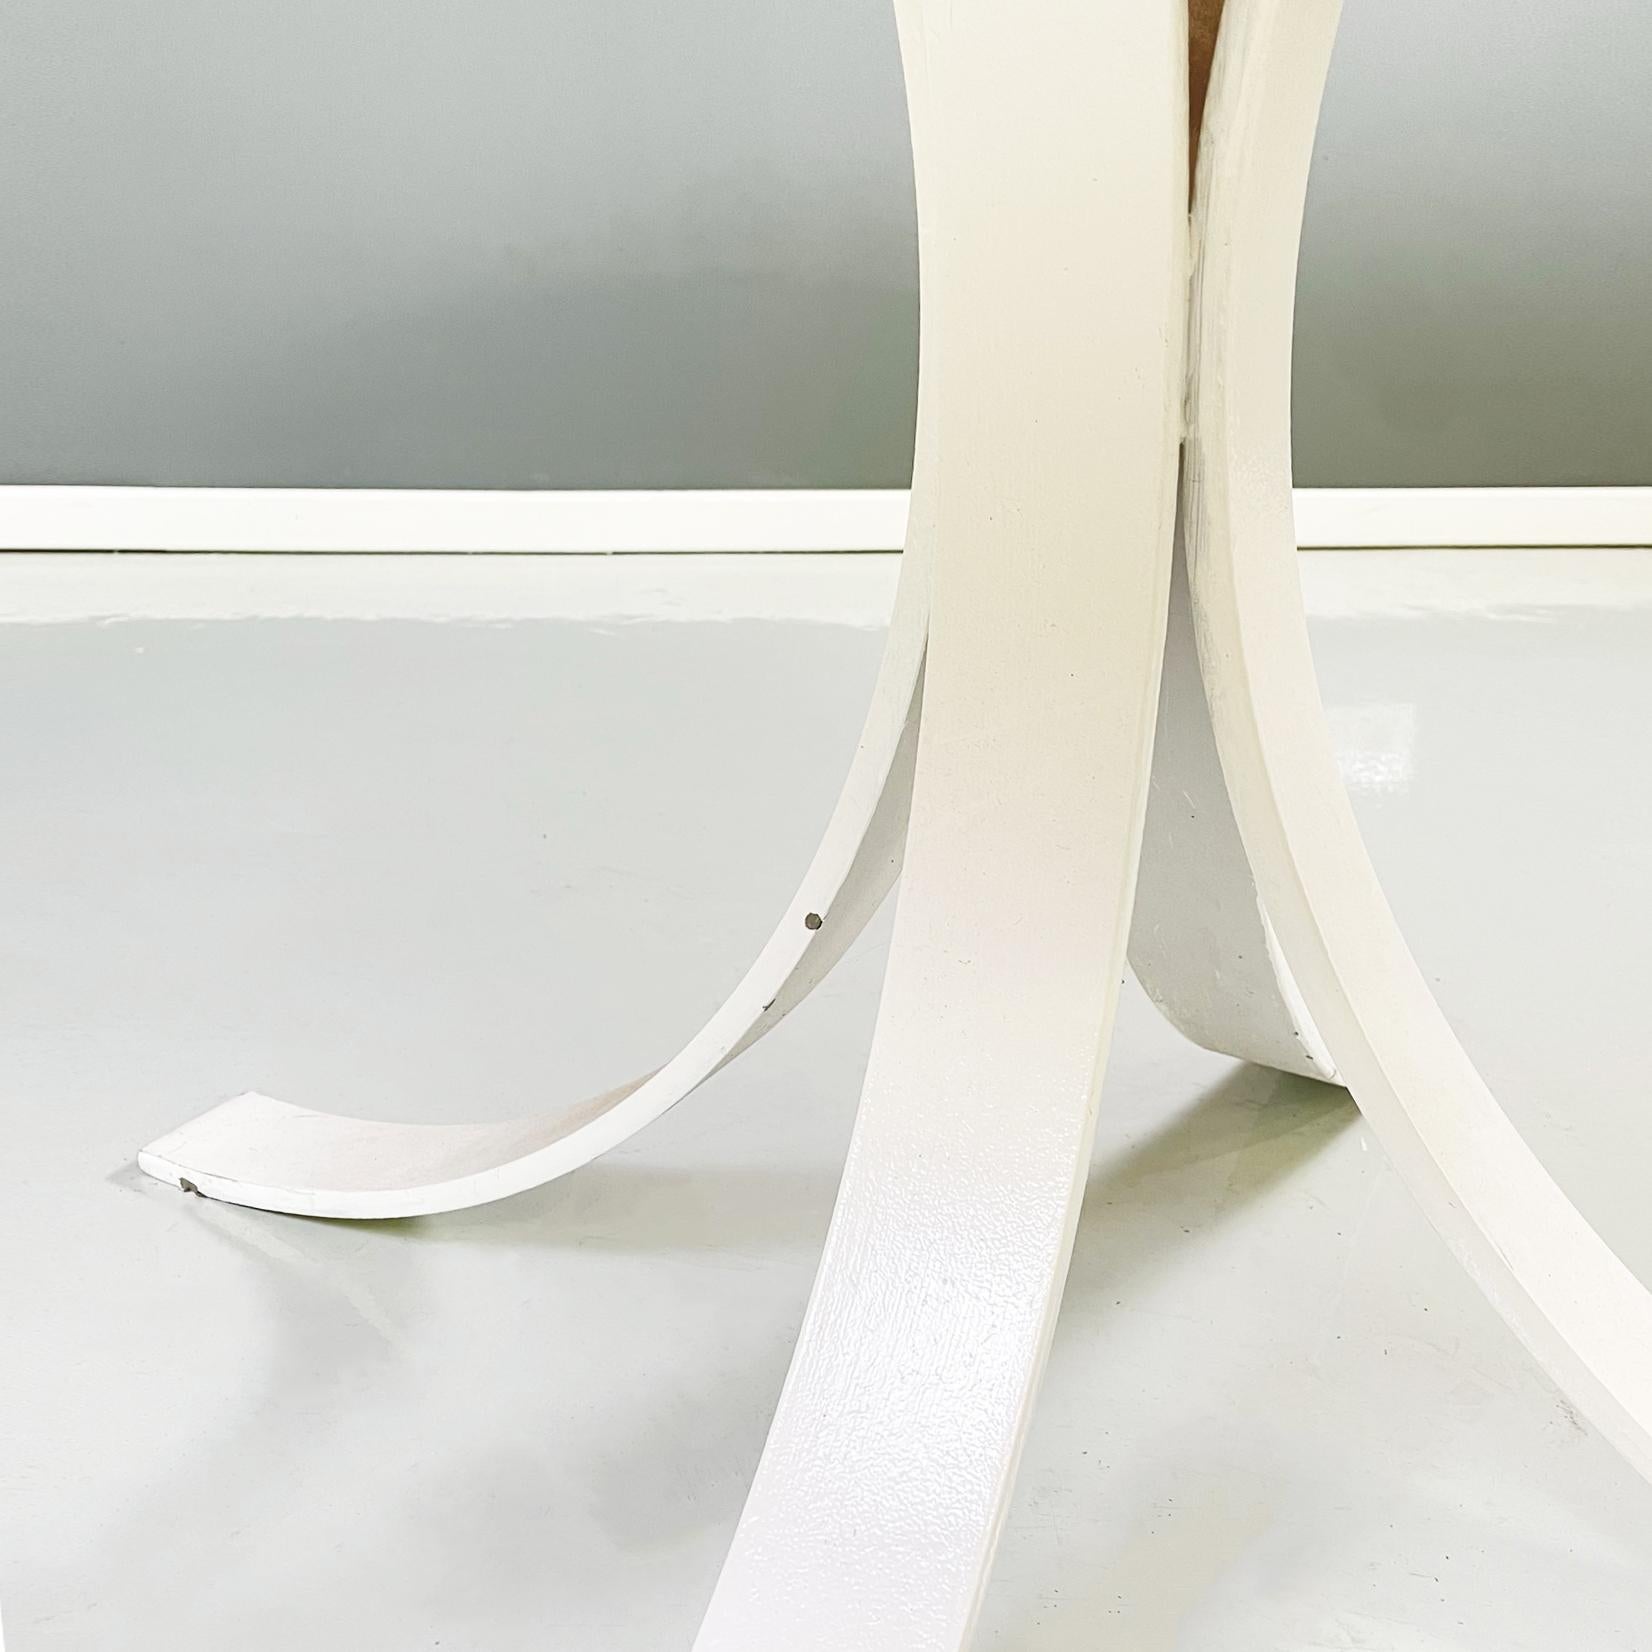 Italian Modern Round Dining Table in White Metal and Solid Wood, 1970s For Sale 6